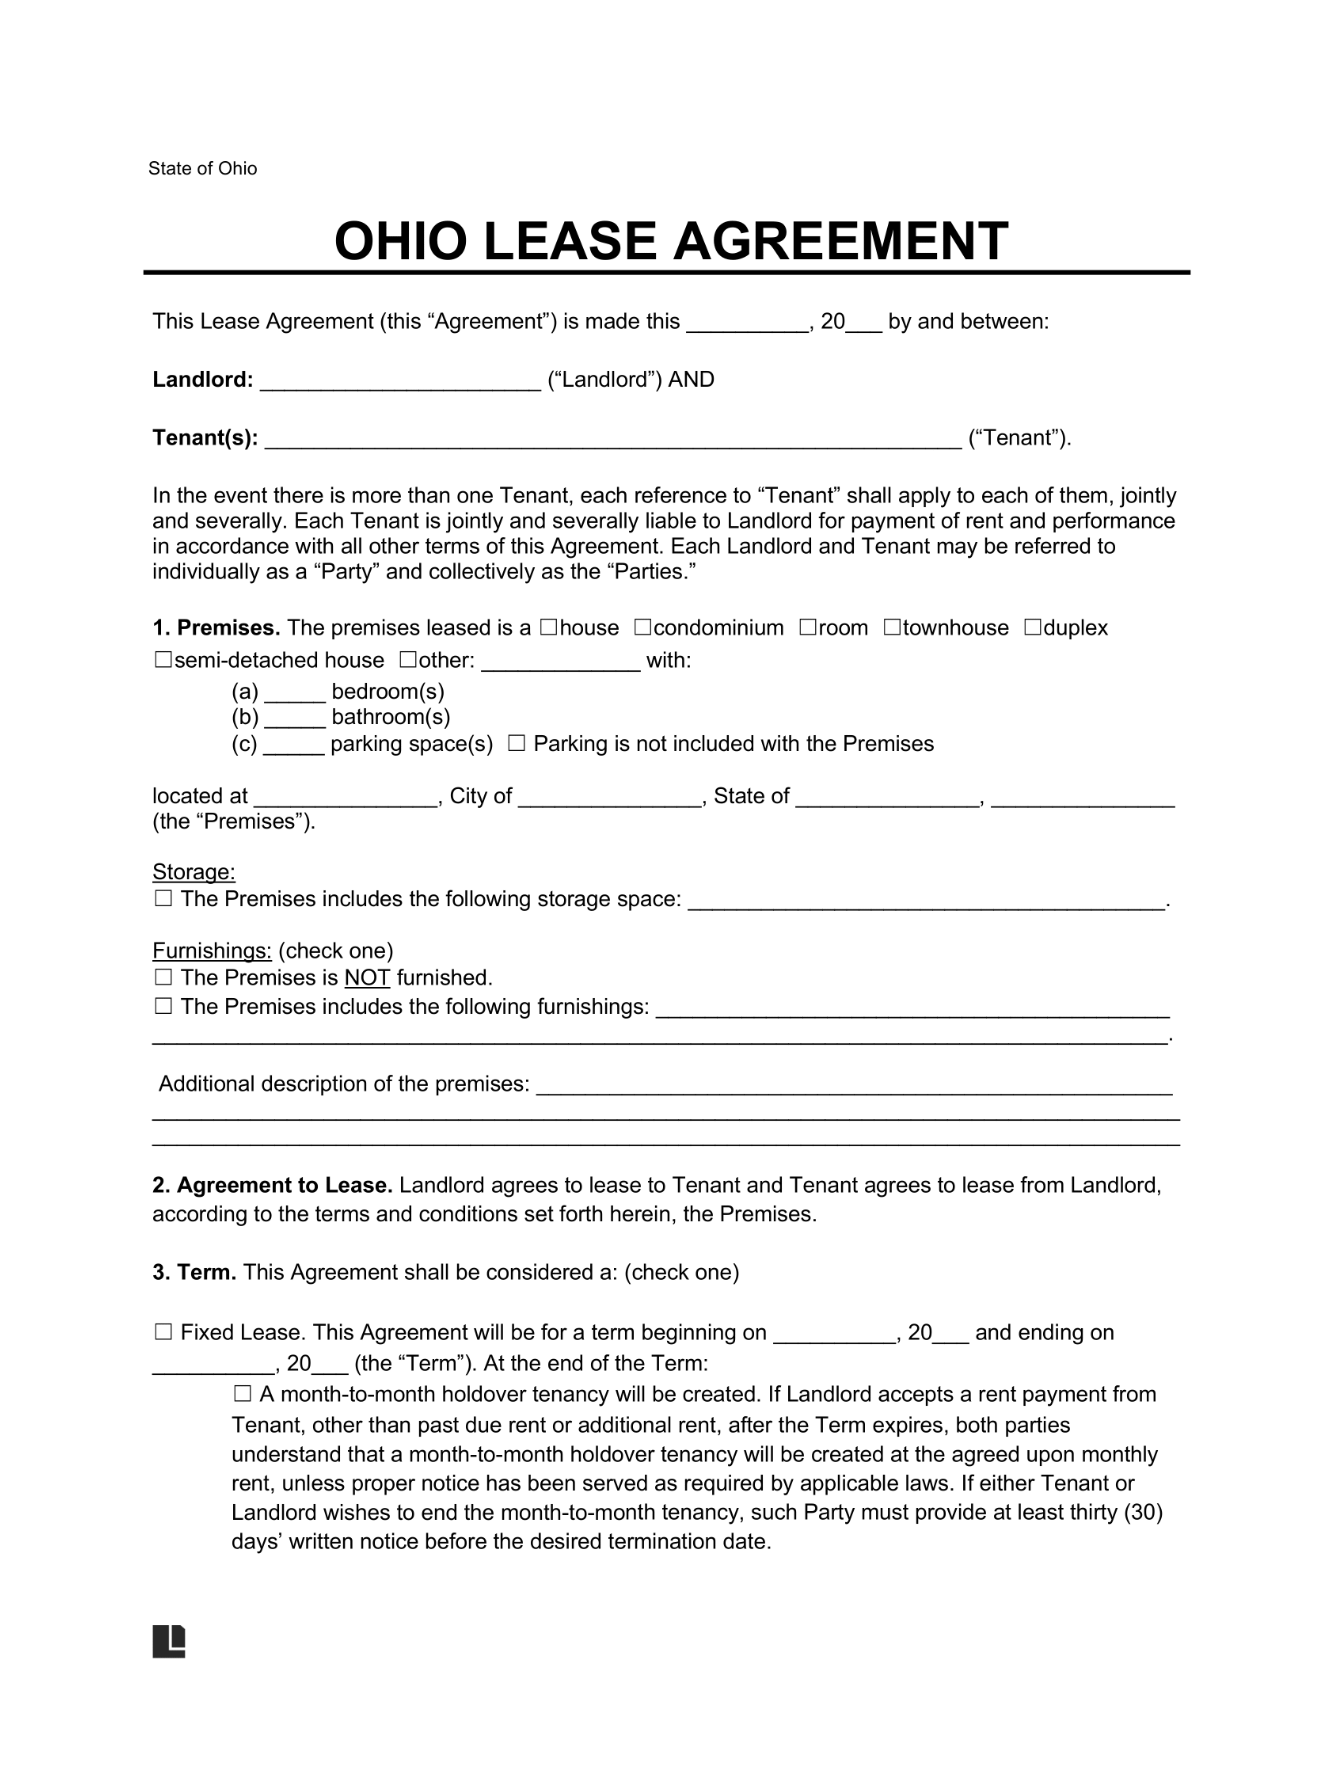 LegalTemplates Ohio Residential Lease Agreement